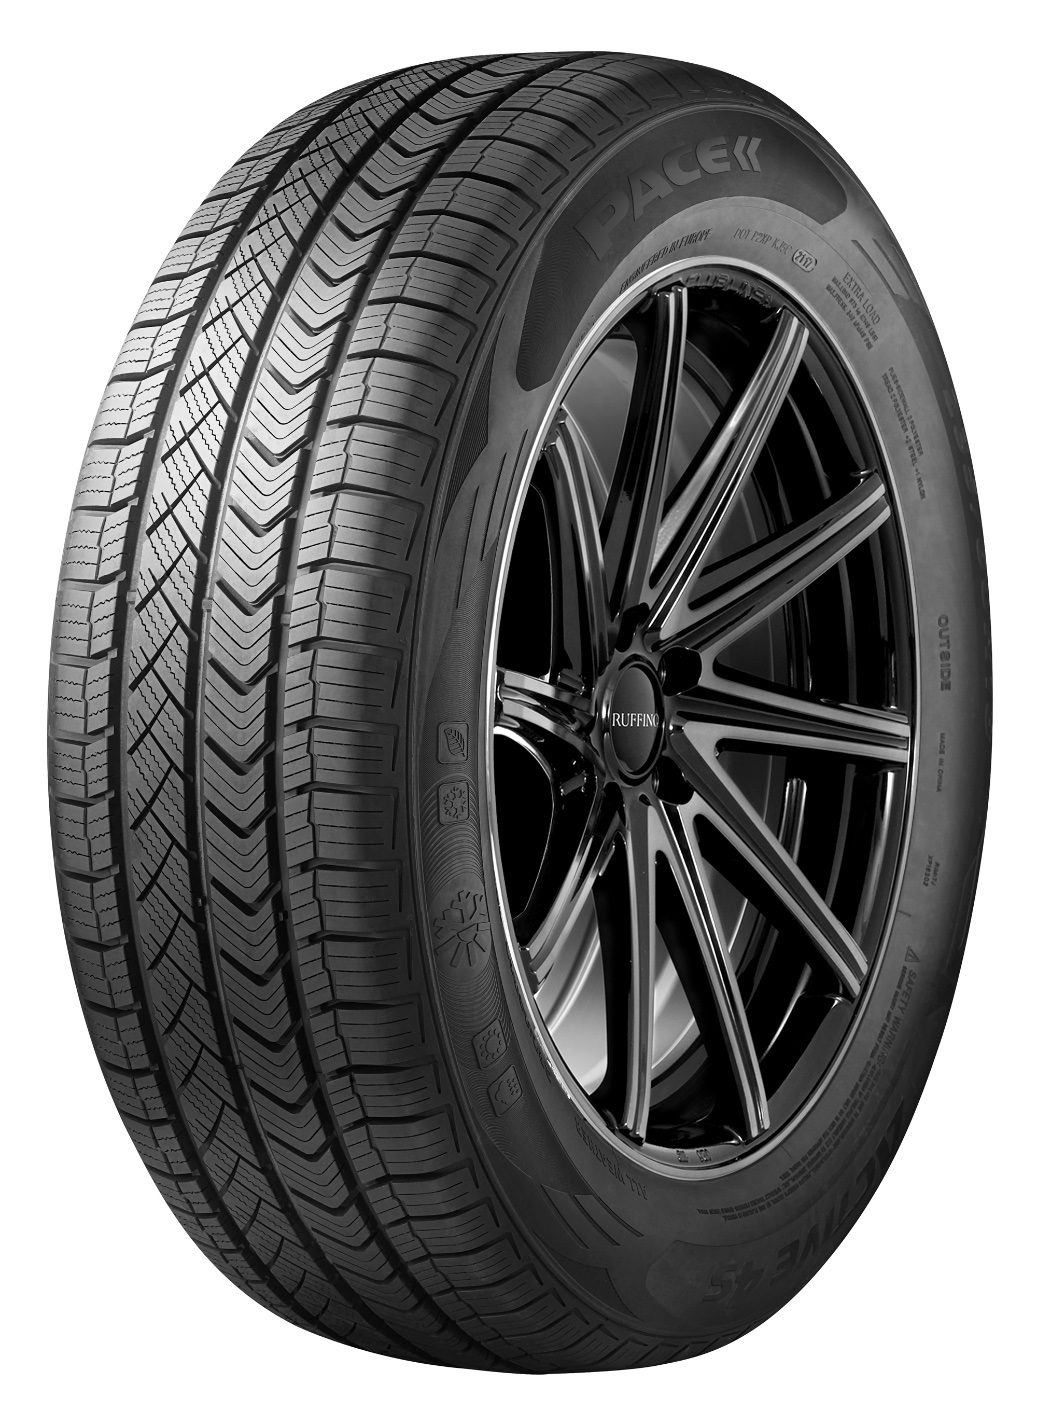 Thumb Pace Gomme Nuove Pace 175/65 R14 82T ACTIVE 4S M+S pneumatici nuovi All Season 0